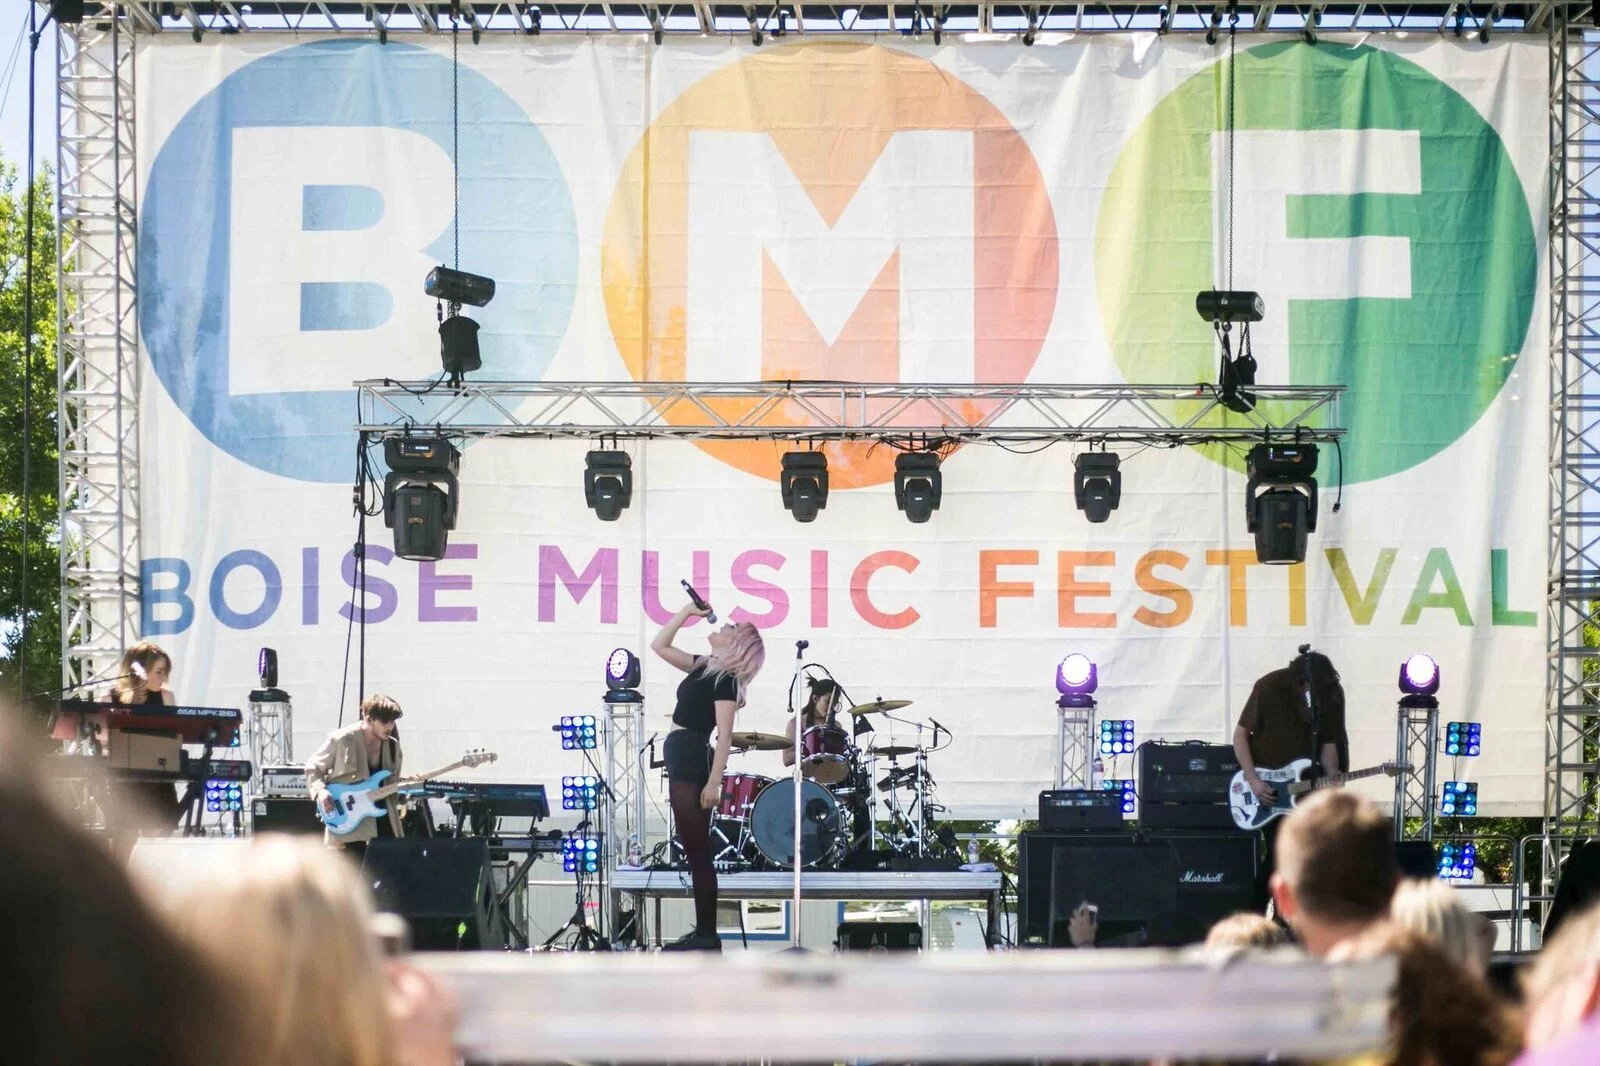 A List Of The Most Entertaining Boise Music Festival Acts Ever!